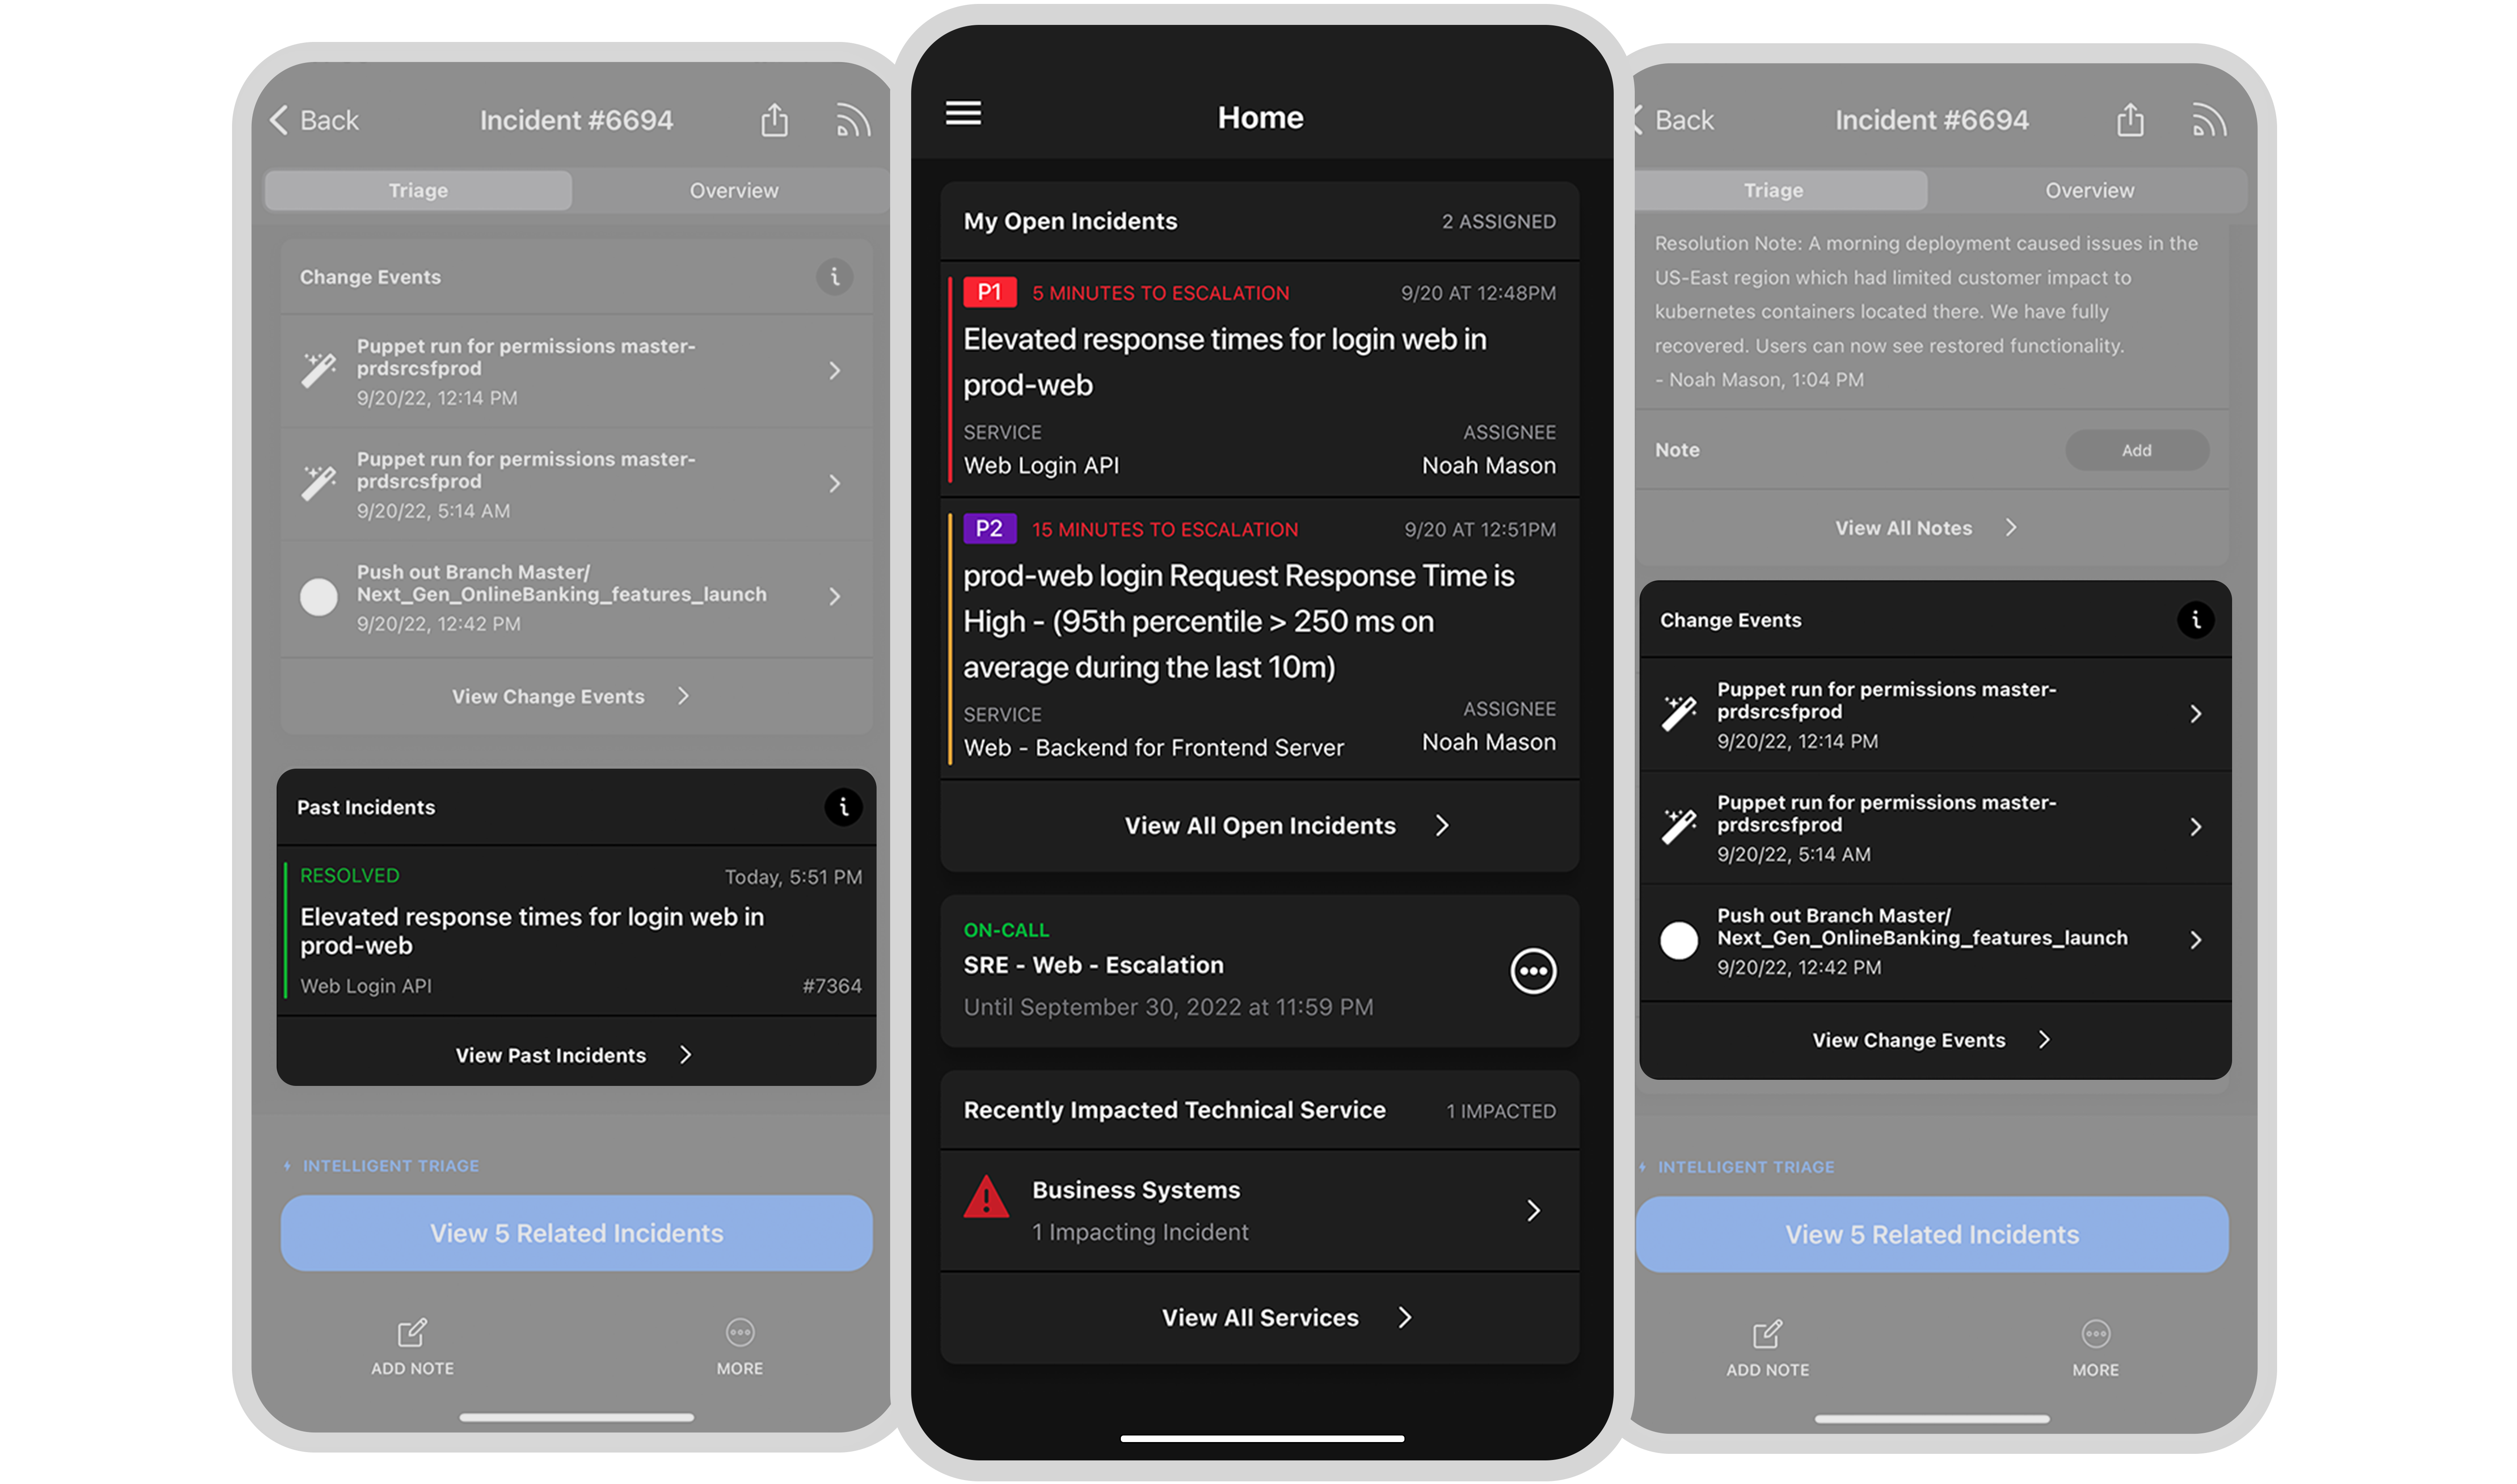 mobile-app-new-mobile-home-screen-past-incidents-change-events (1)